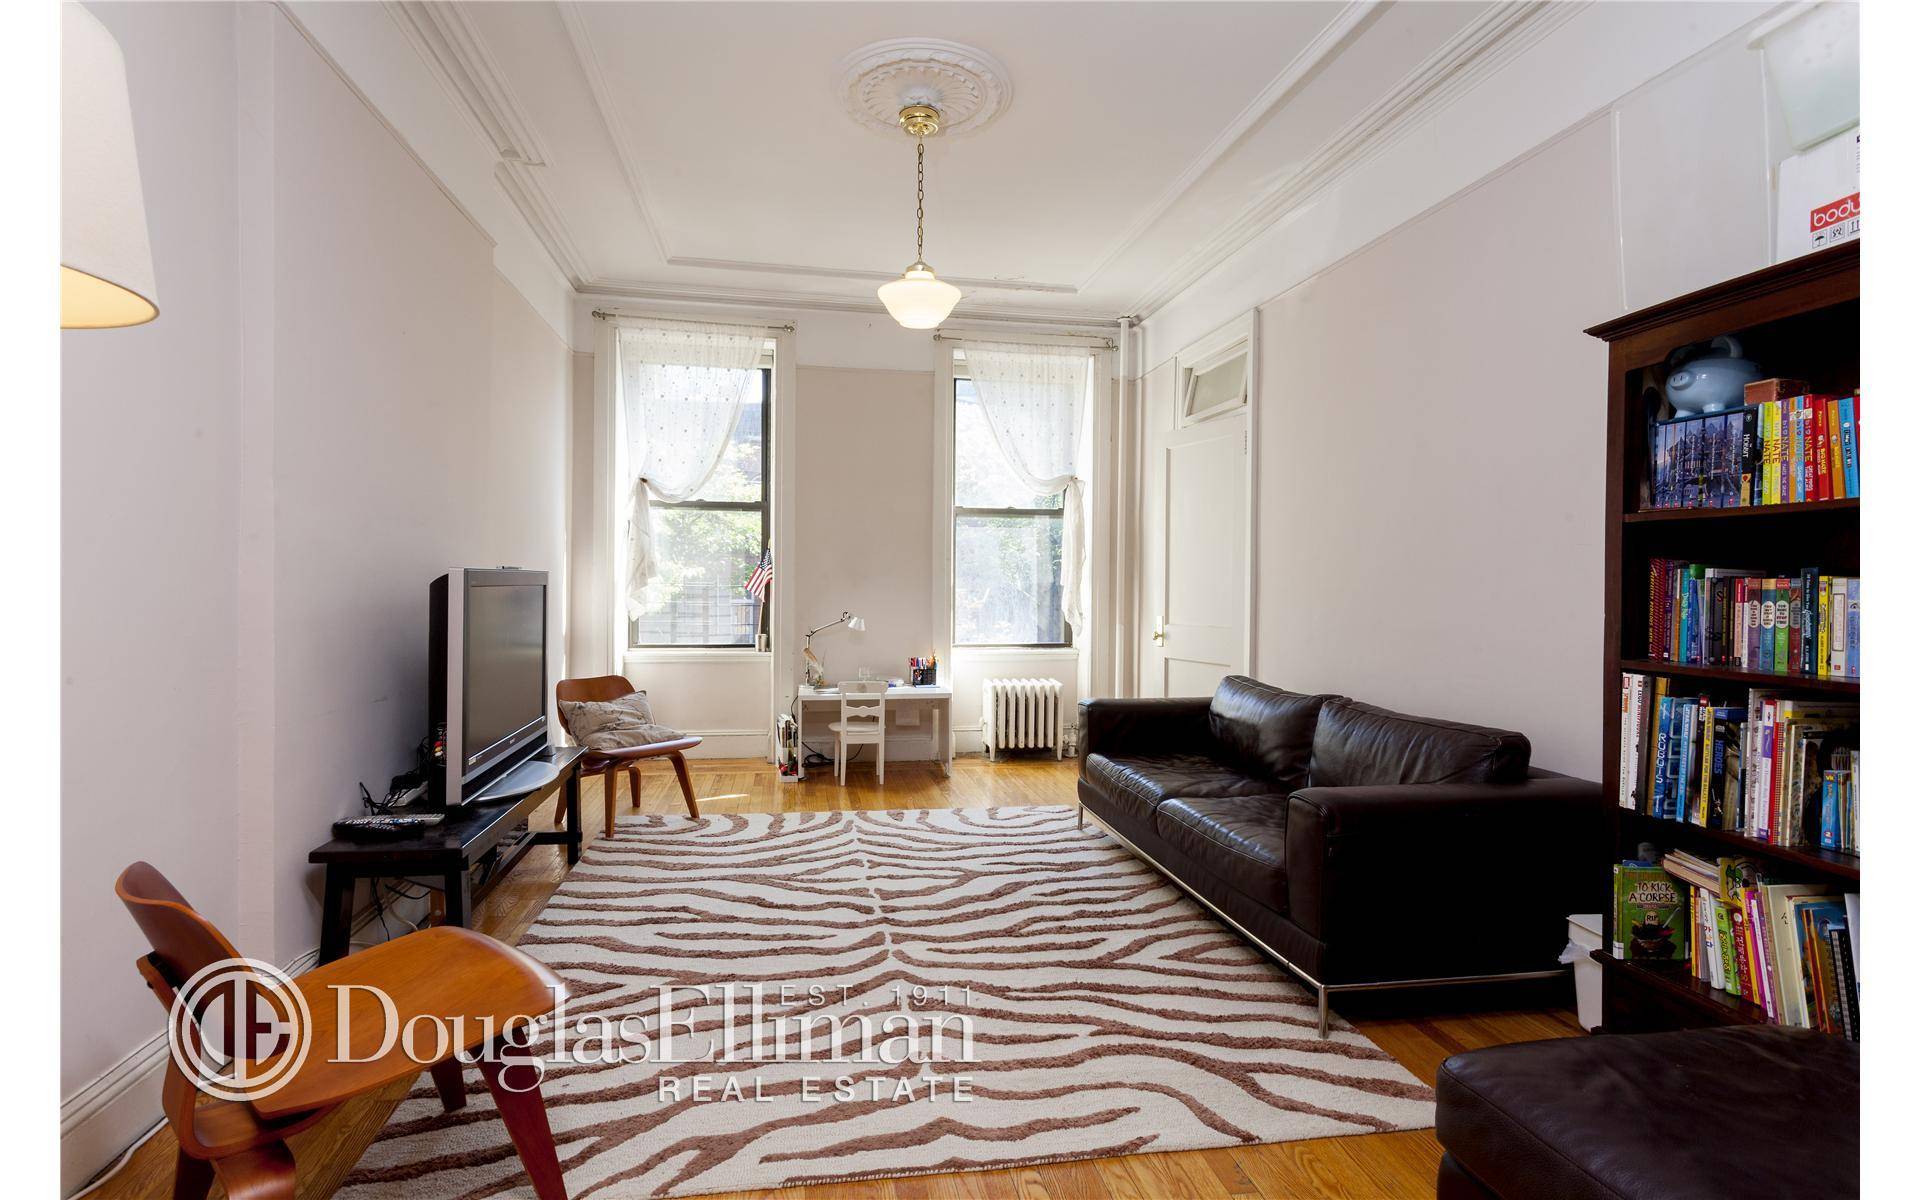 In the Heart of Park Slope, this large 2 Bed, flex 3 Bedroom, is equipped with large windows throughout the apartment to bring in loads of natural sunlight.